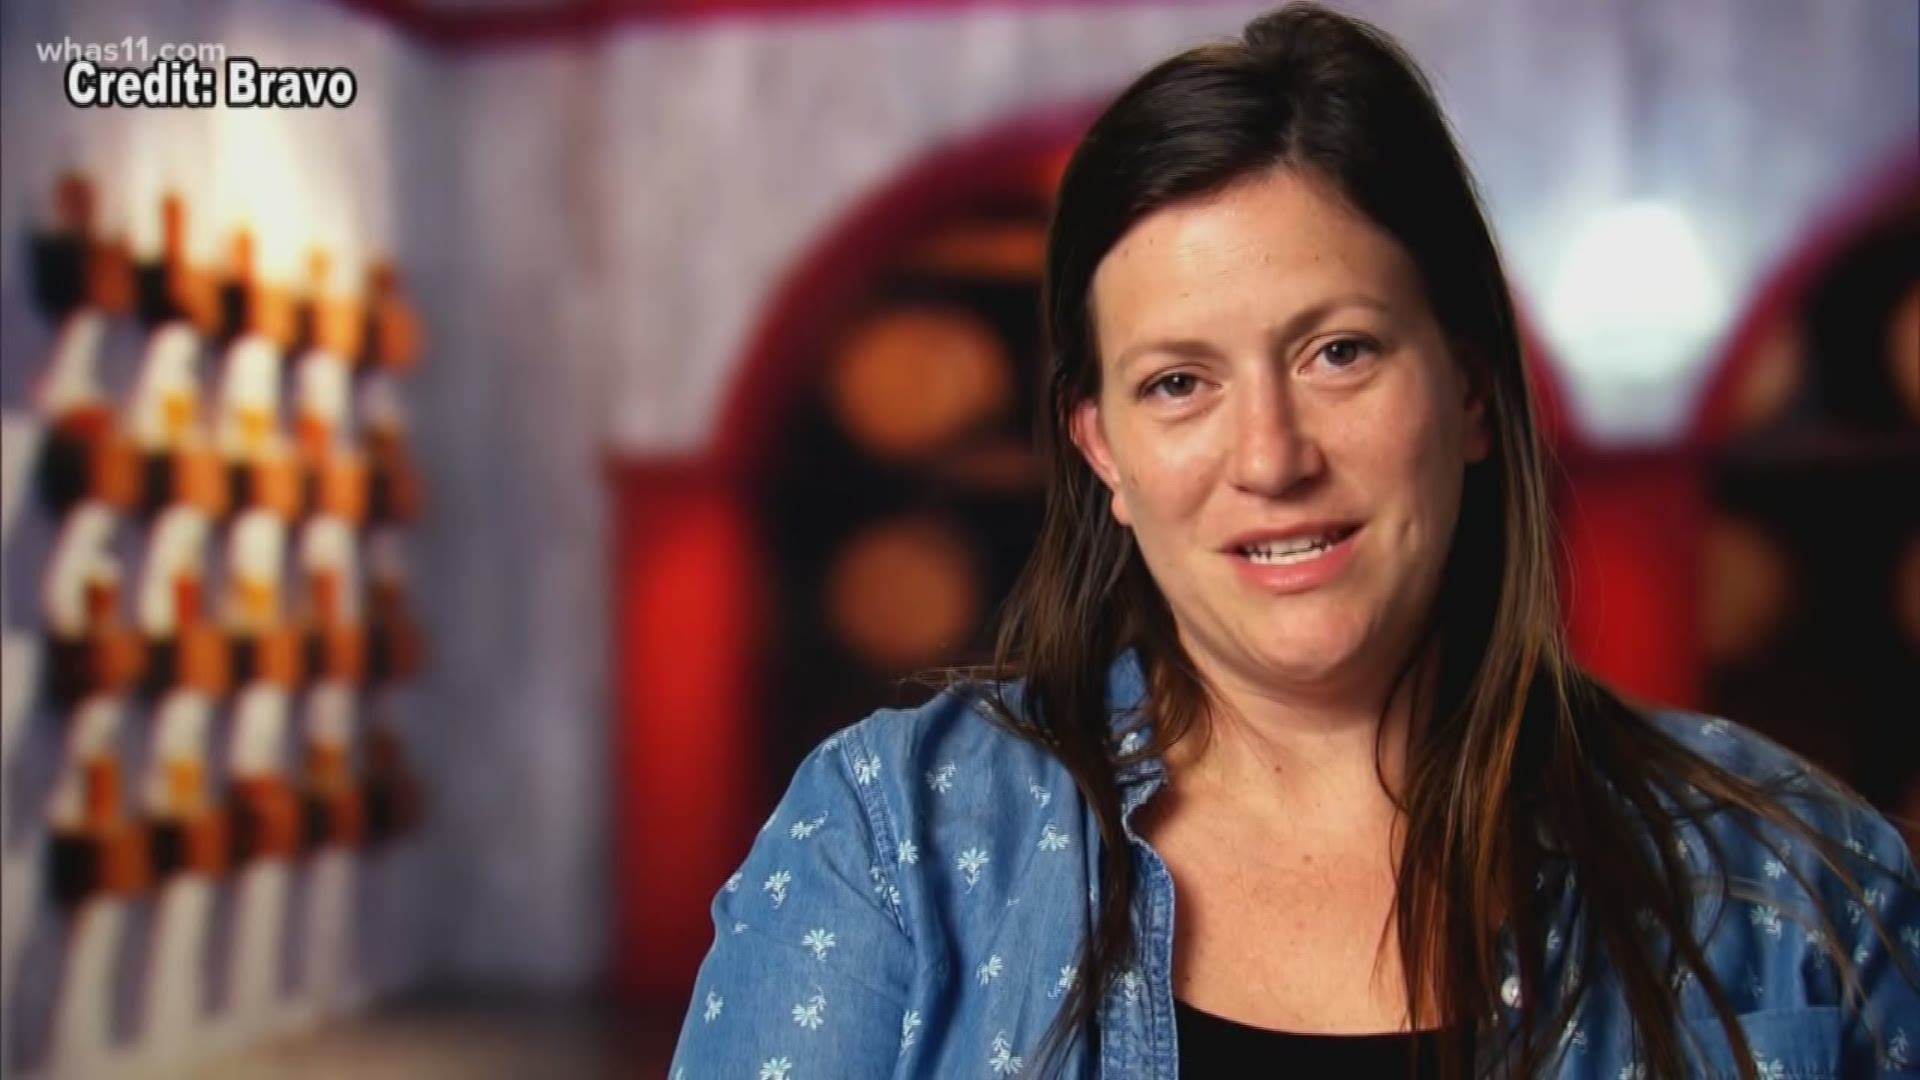 Chef Sara Bradley talked about her experience on Top Chef ahead of the show's premiere.